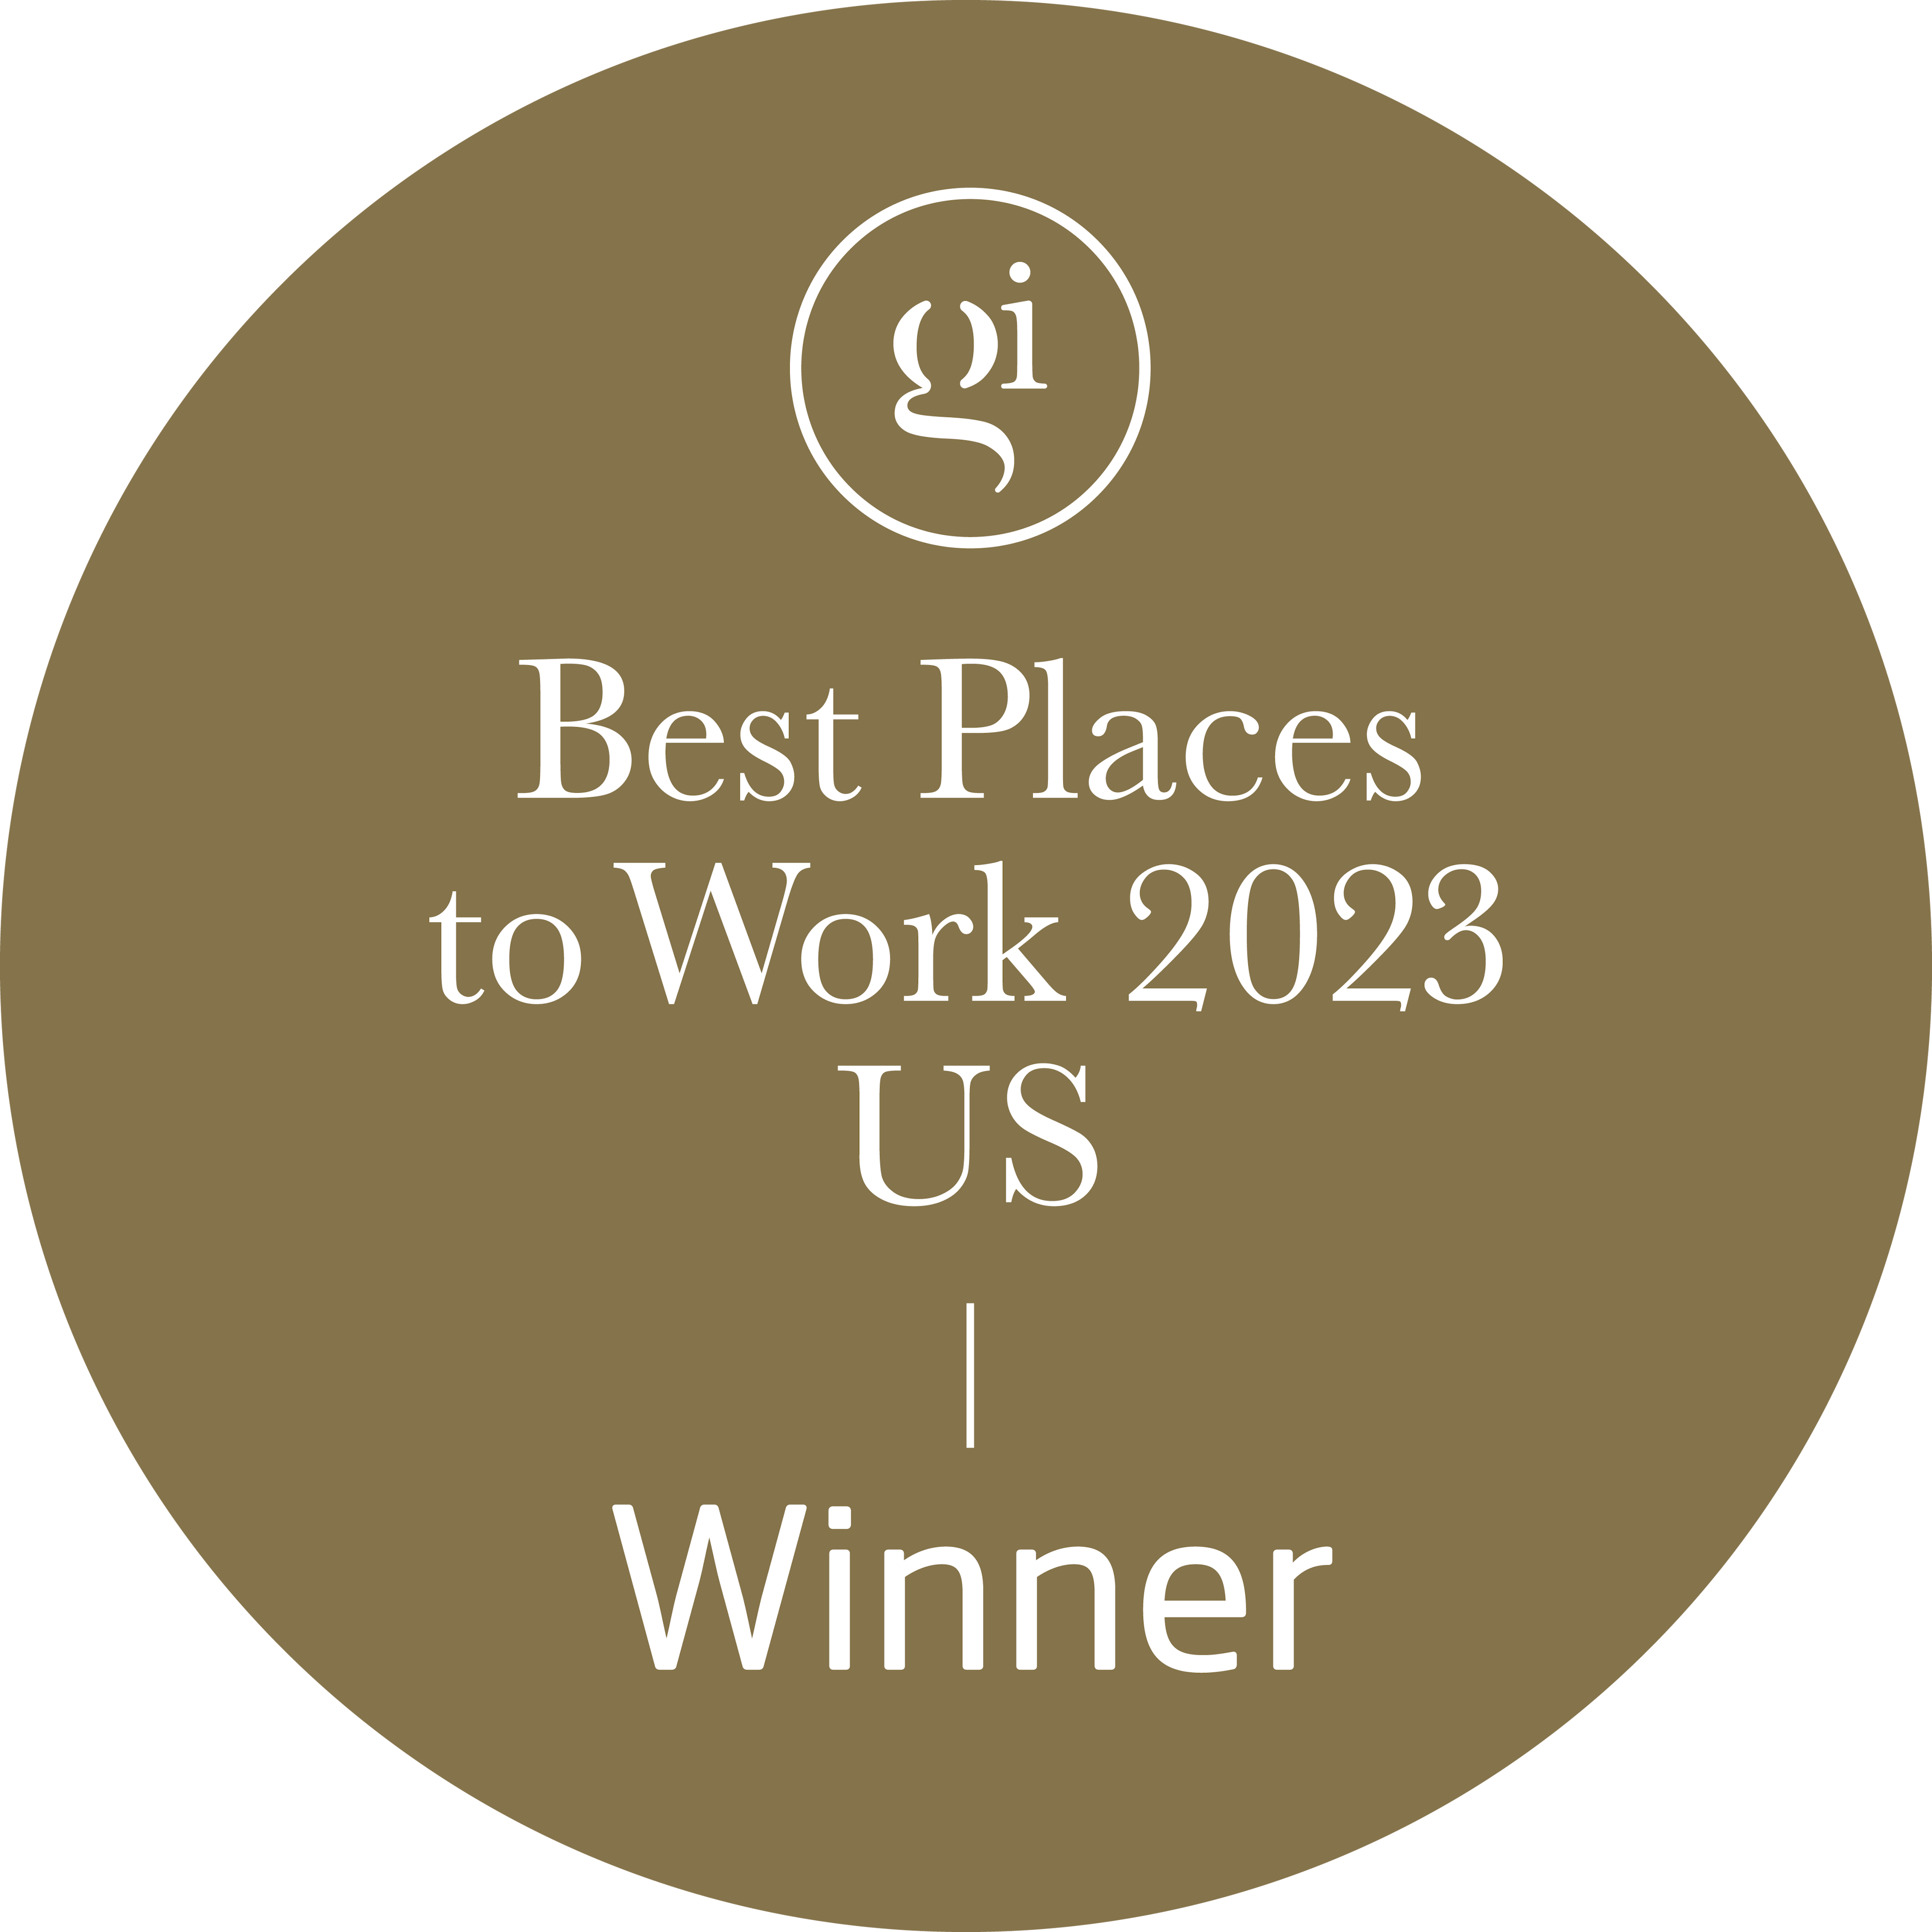 Best Places to Work 2023 US Winner